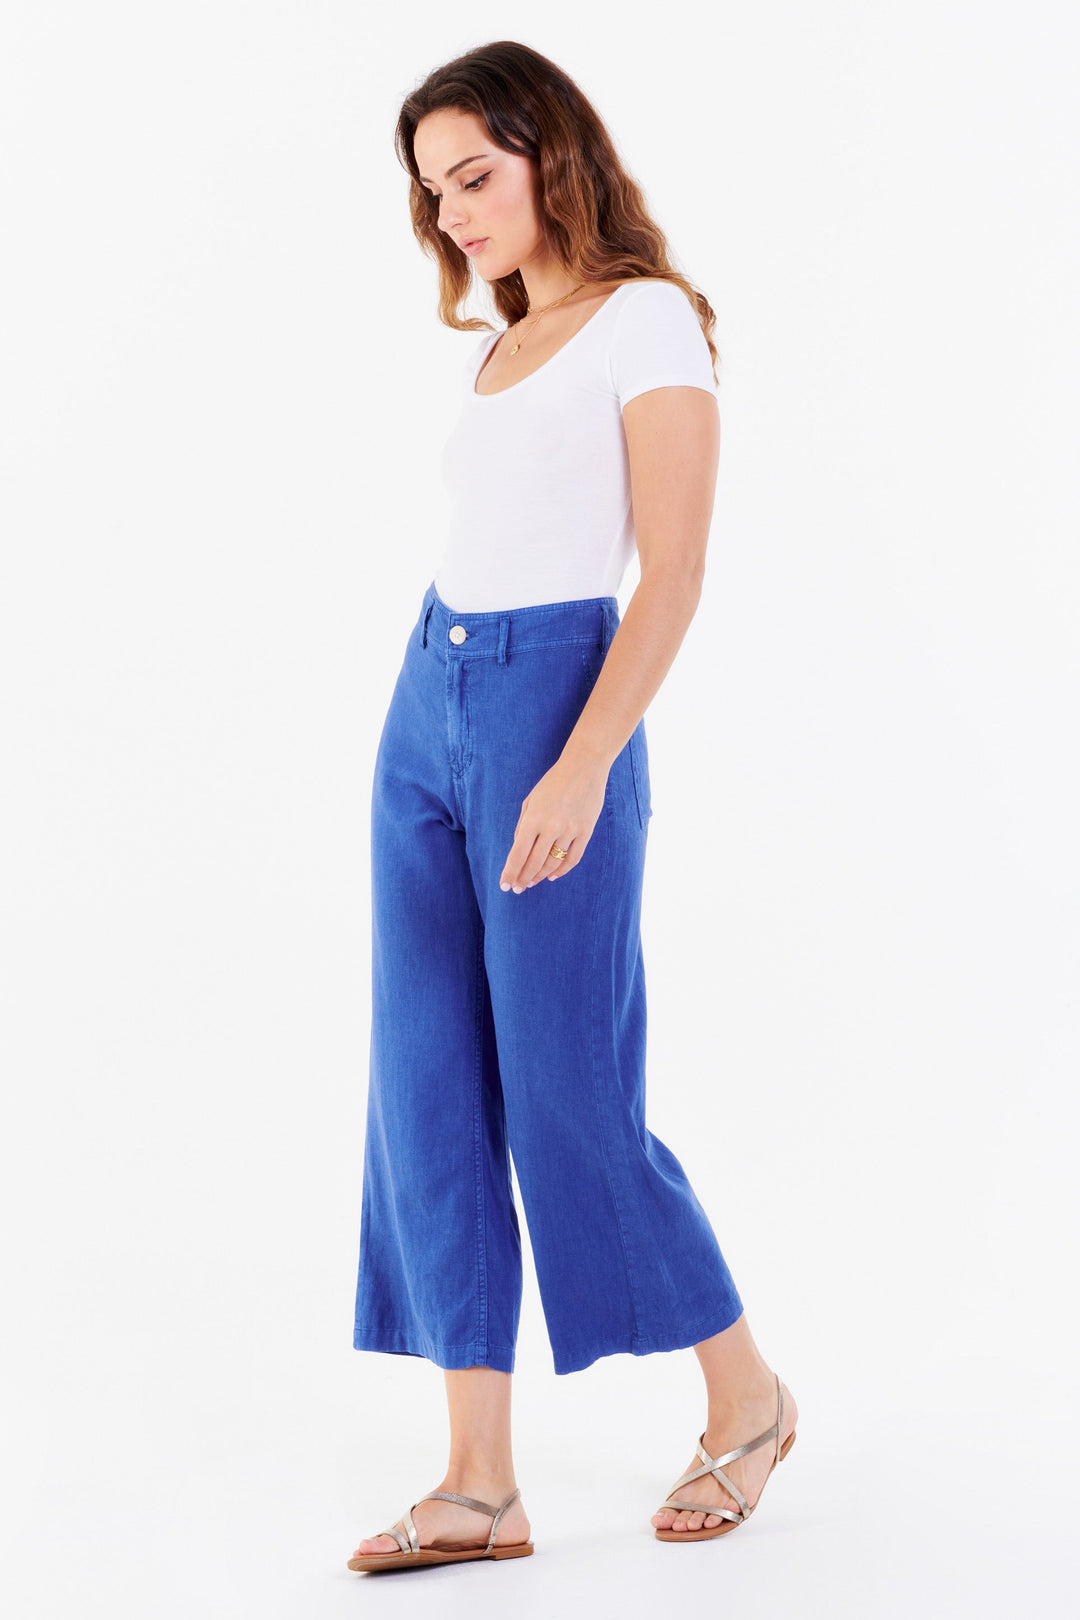 Tips For Styling Wide-Leg Cropped Pants - Kristy By The Sea  Cropped wide  leg jeans, Wide leg cropped pants, Crop dress pants